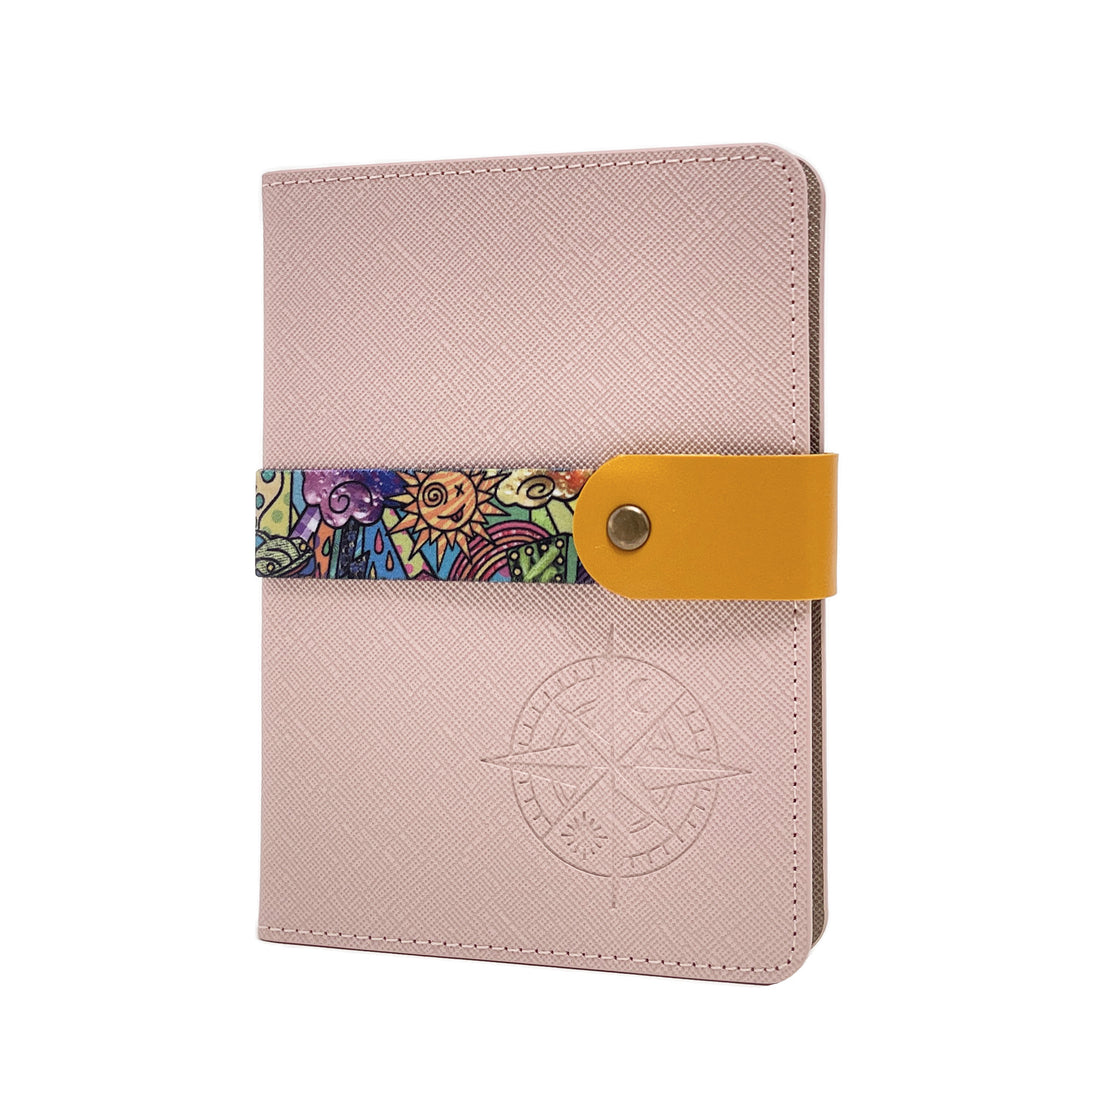 Planner Band【Dream Town】(Pocket Size)